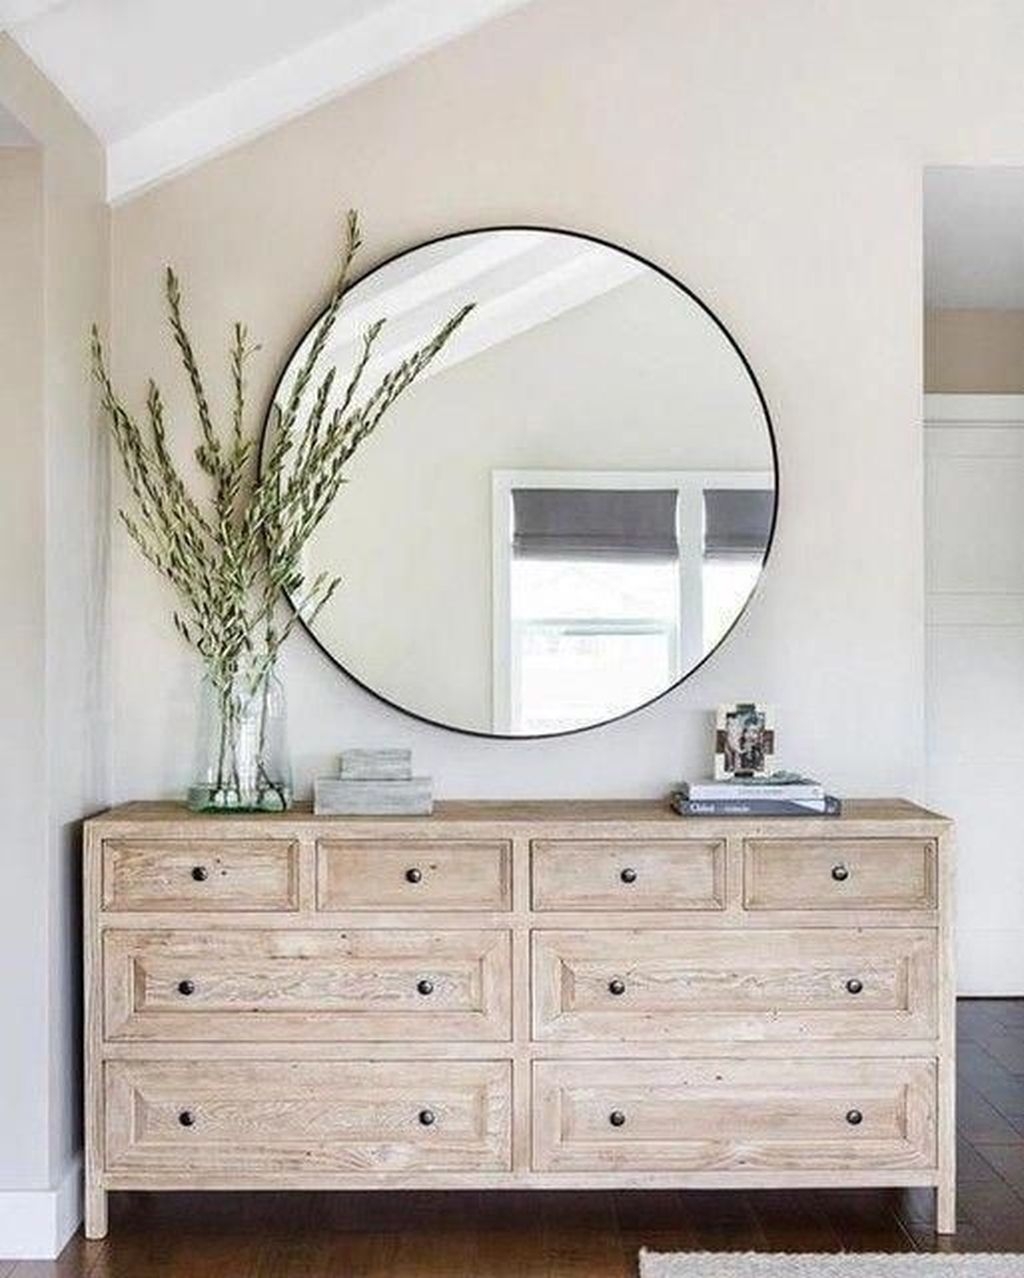 Stylish Bedroom Dressers Ideas With Mirrors That You Need To Try 16